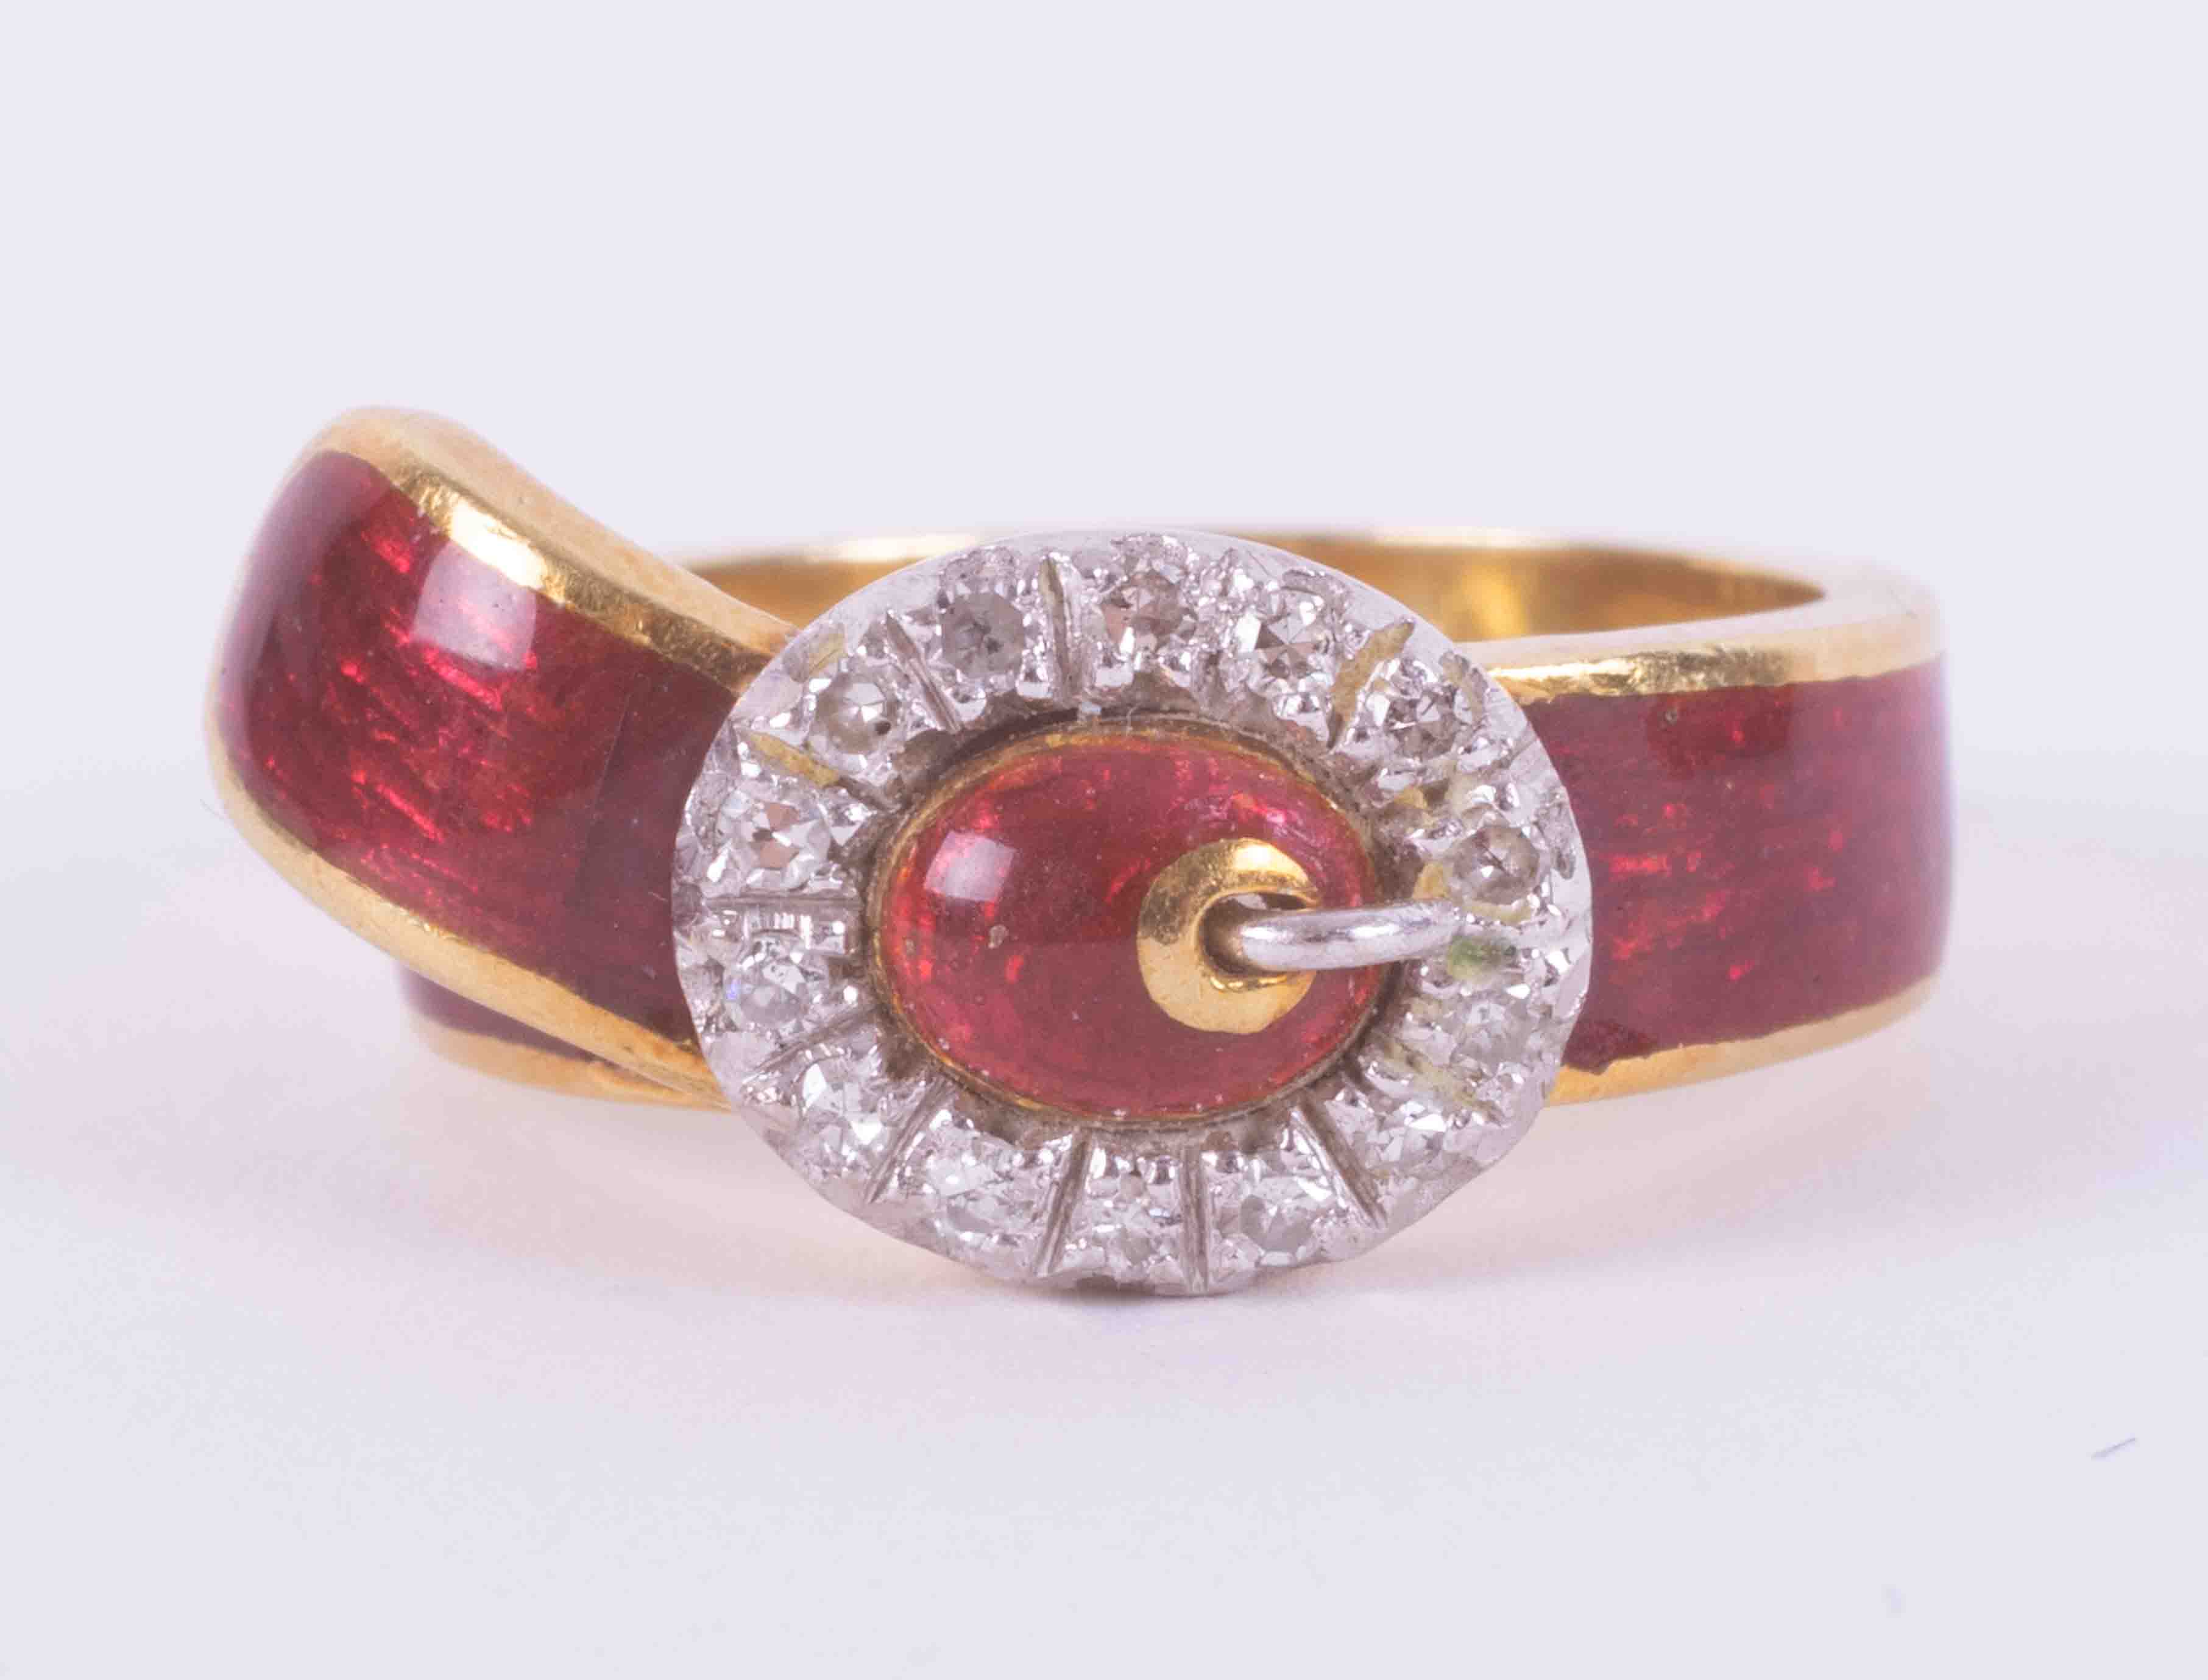 An 18ct yellow gold buckle design ring with red enamel and 14 round old round cut diamonds, total